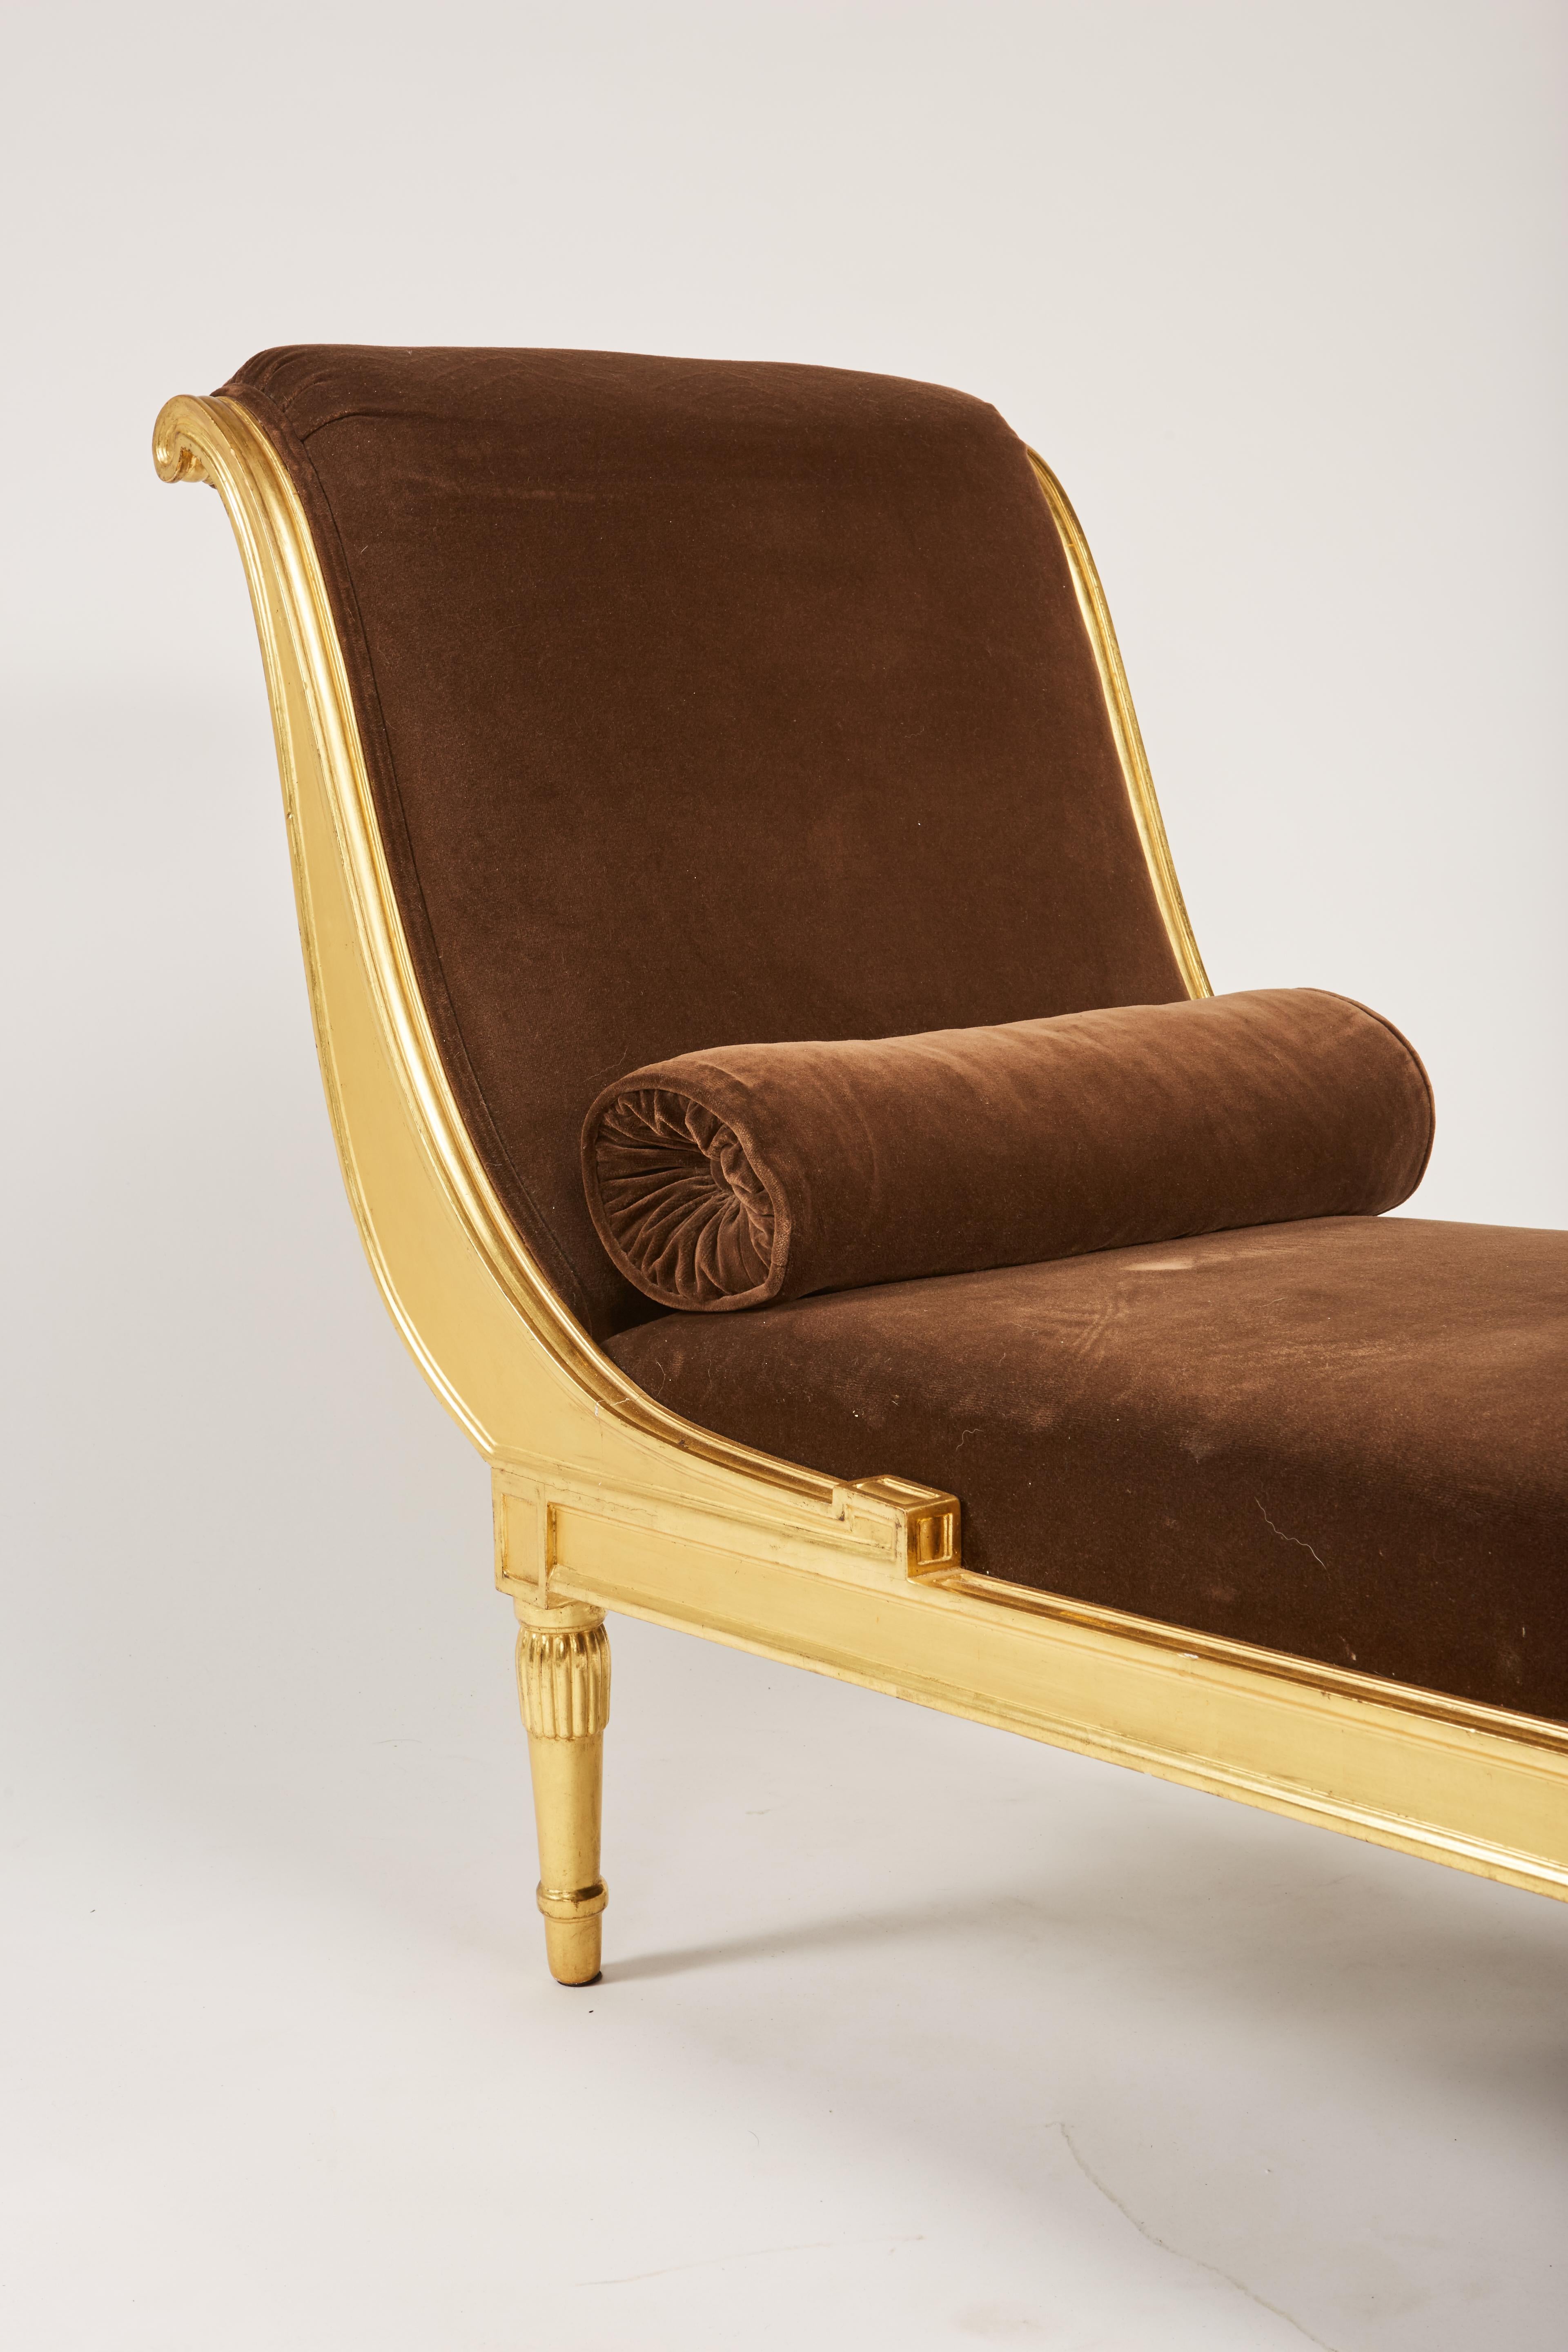 Early 20th Century Rare 1920s French Deco Giltwood Chaise by L'Atelier d'Art du Printemps For Sale